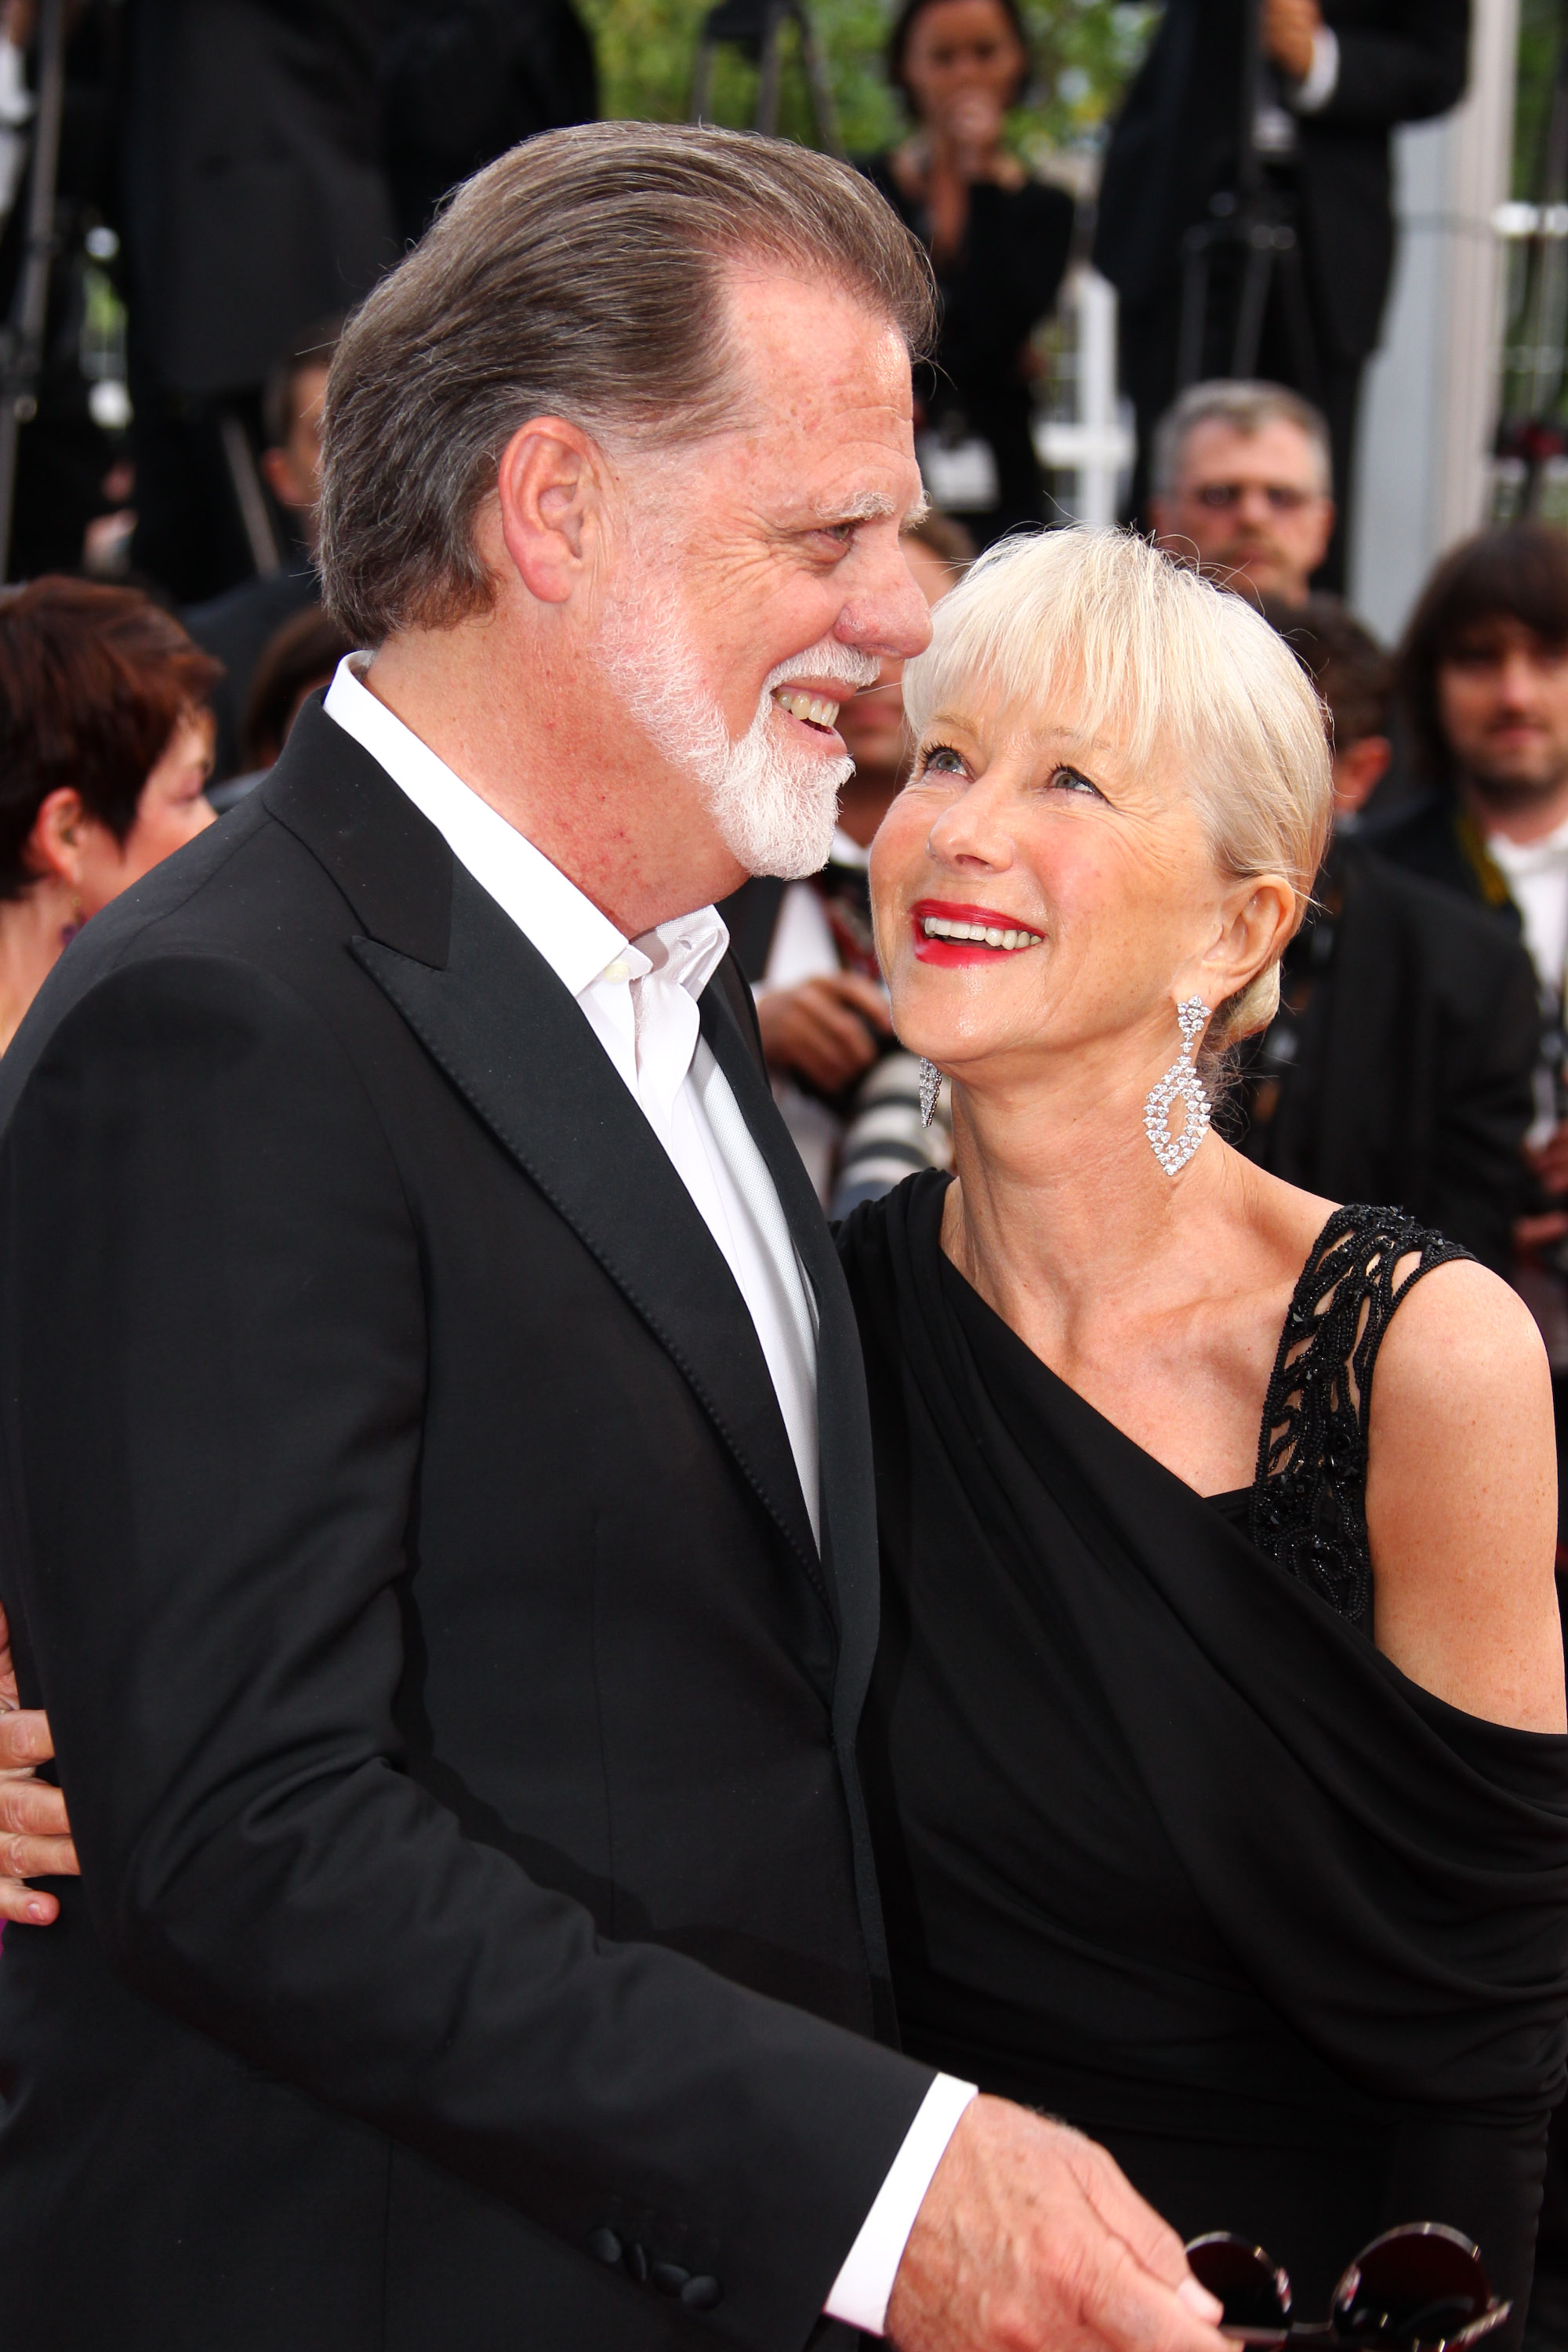  Helen Mirren and her husband Taylor Hackford at the Cannes Festival in 2010 | Source: Getty Images